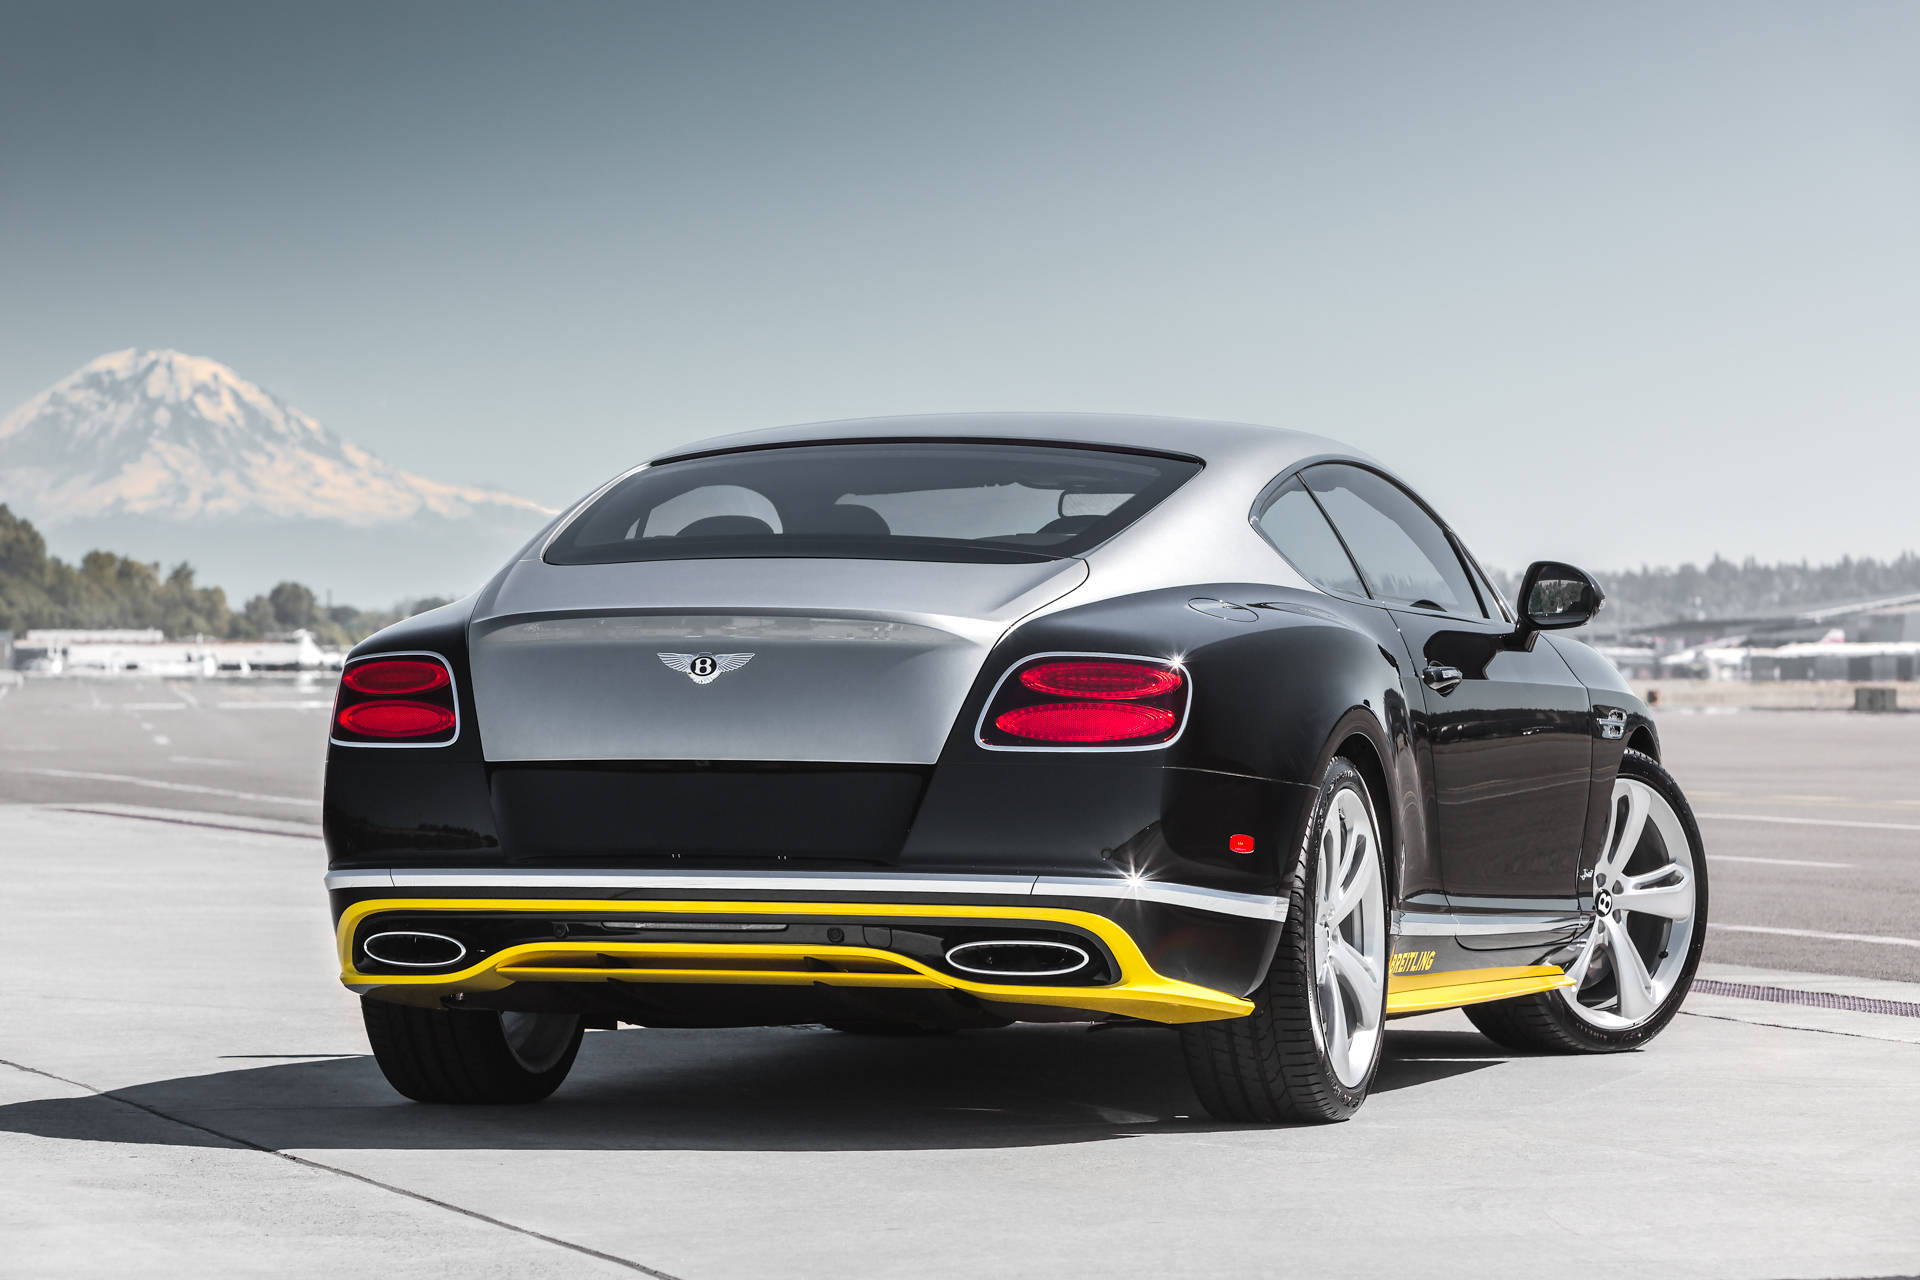 The iconic Bentley Continental GT Wallpaper